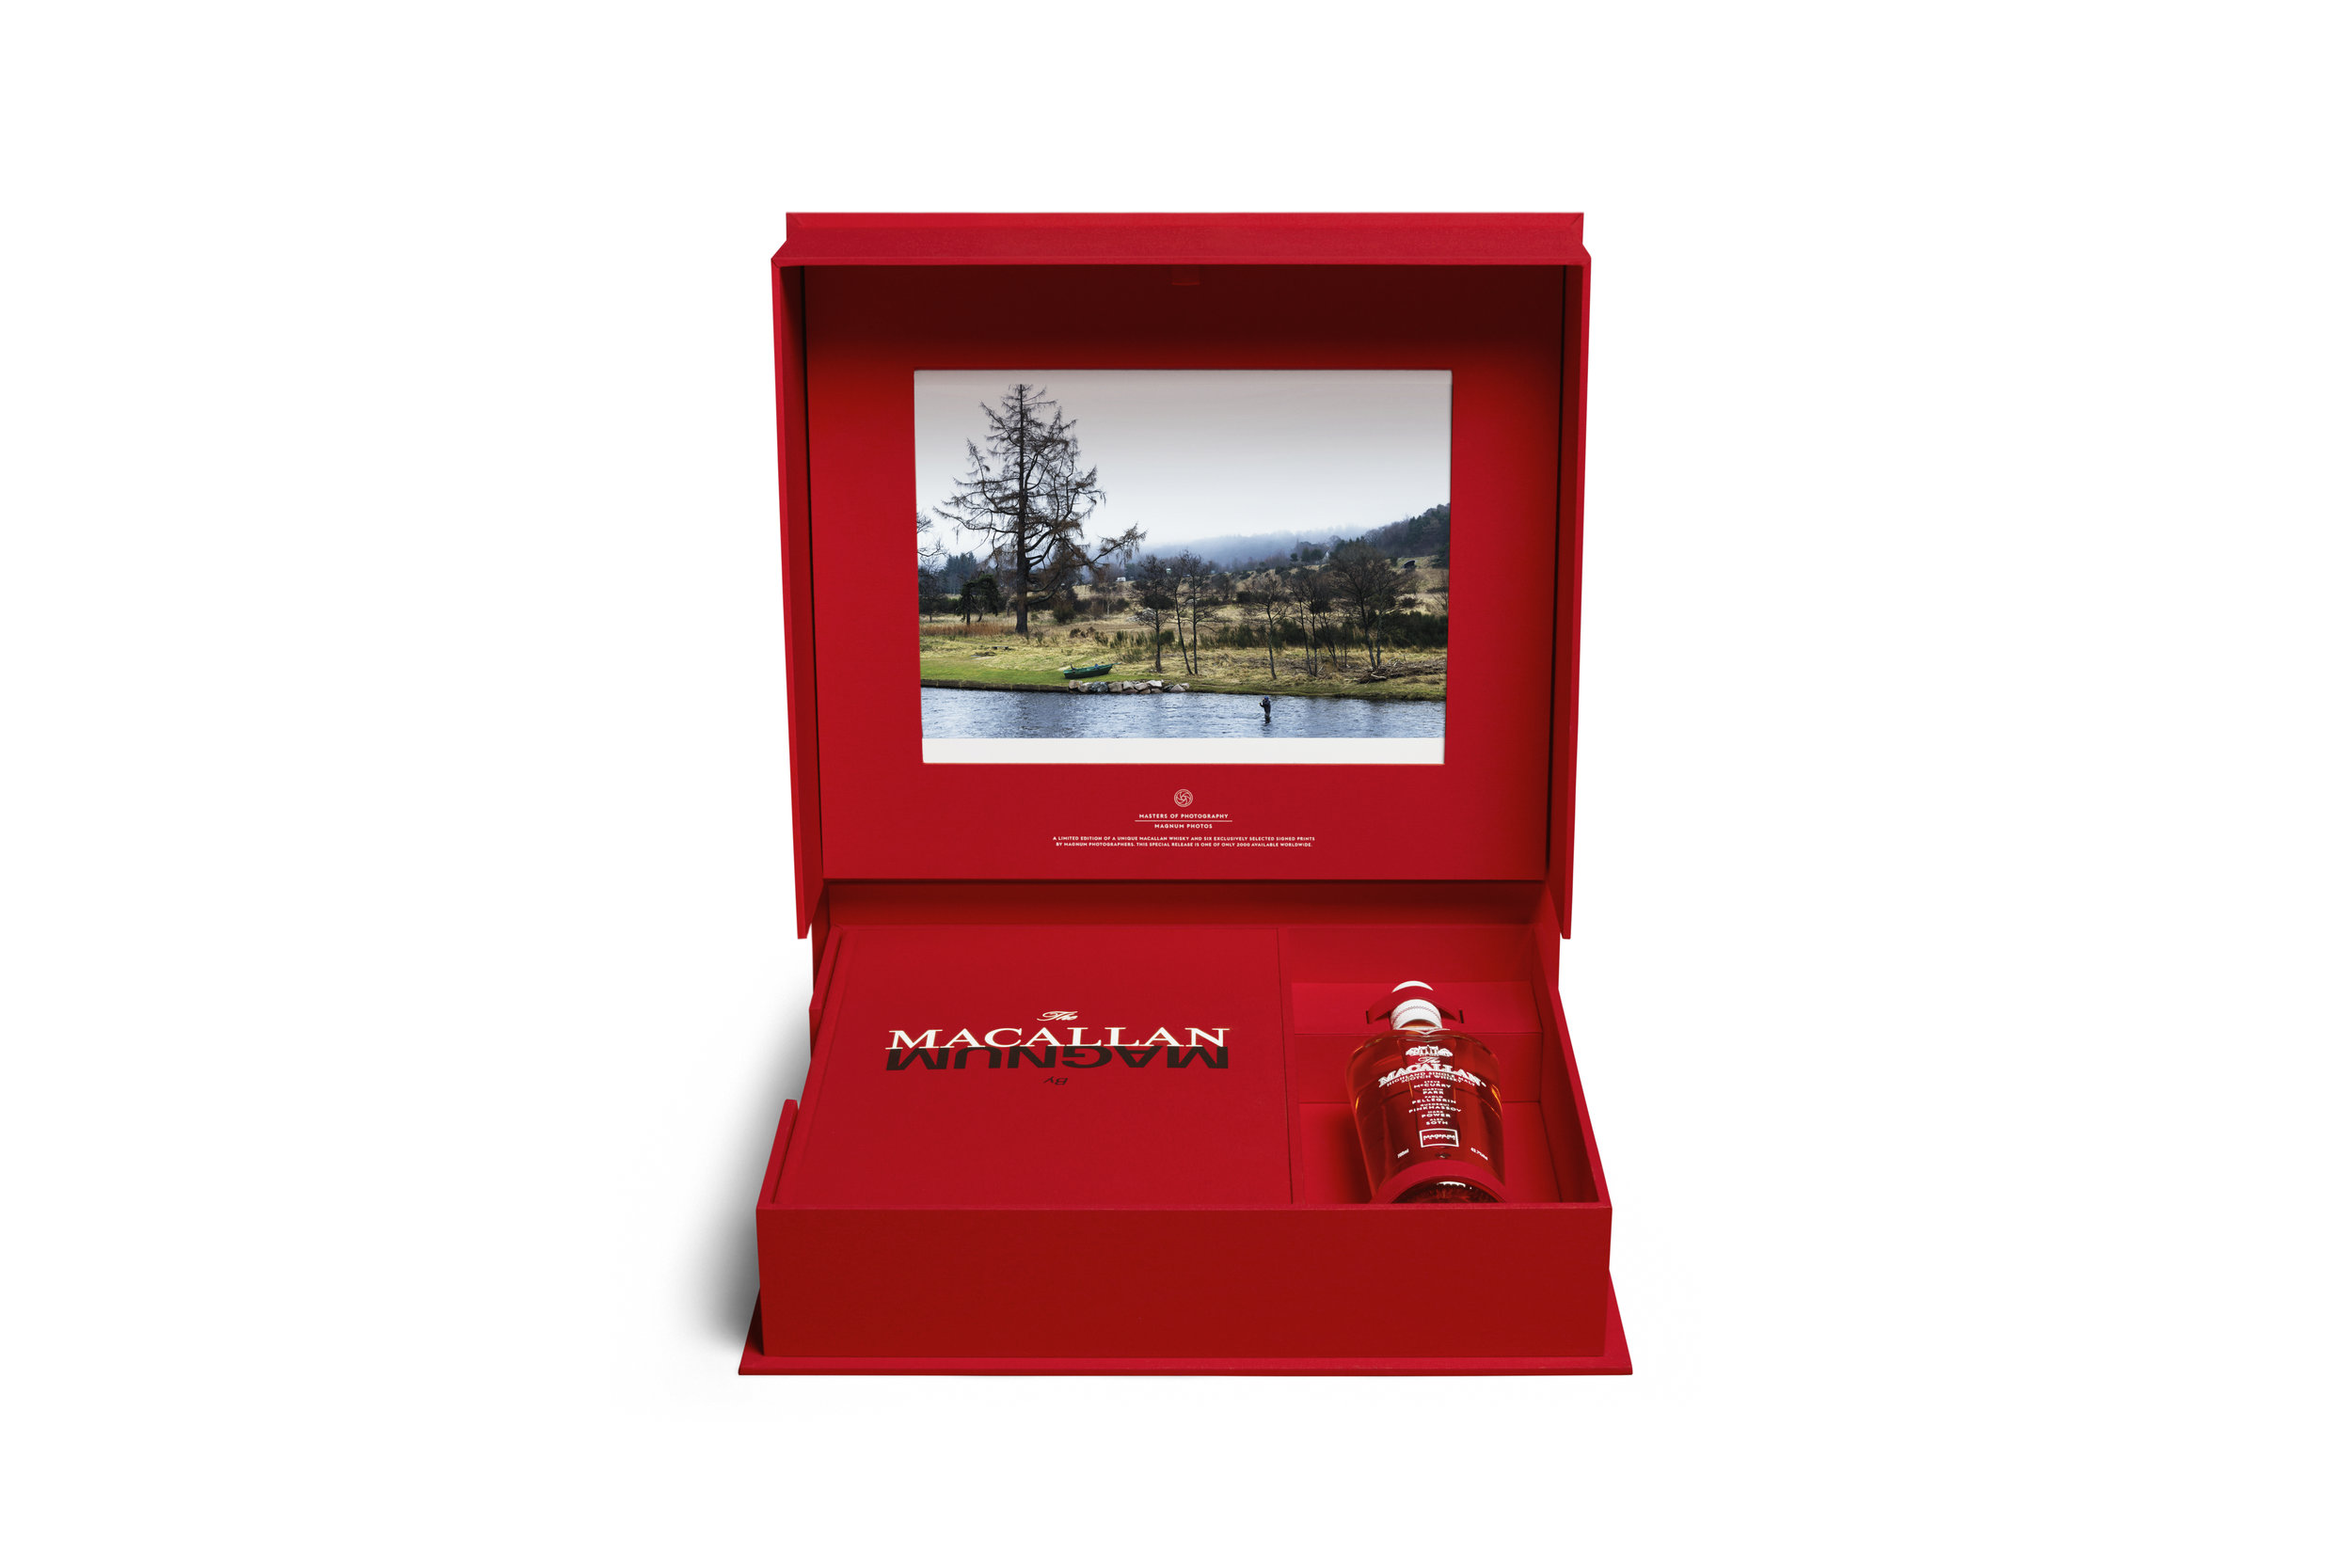 7. The Macallan Masters of Photography Magnum Edition_Alec Soth.jpg